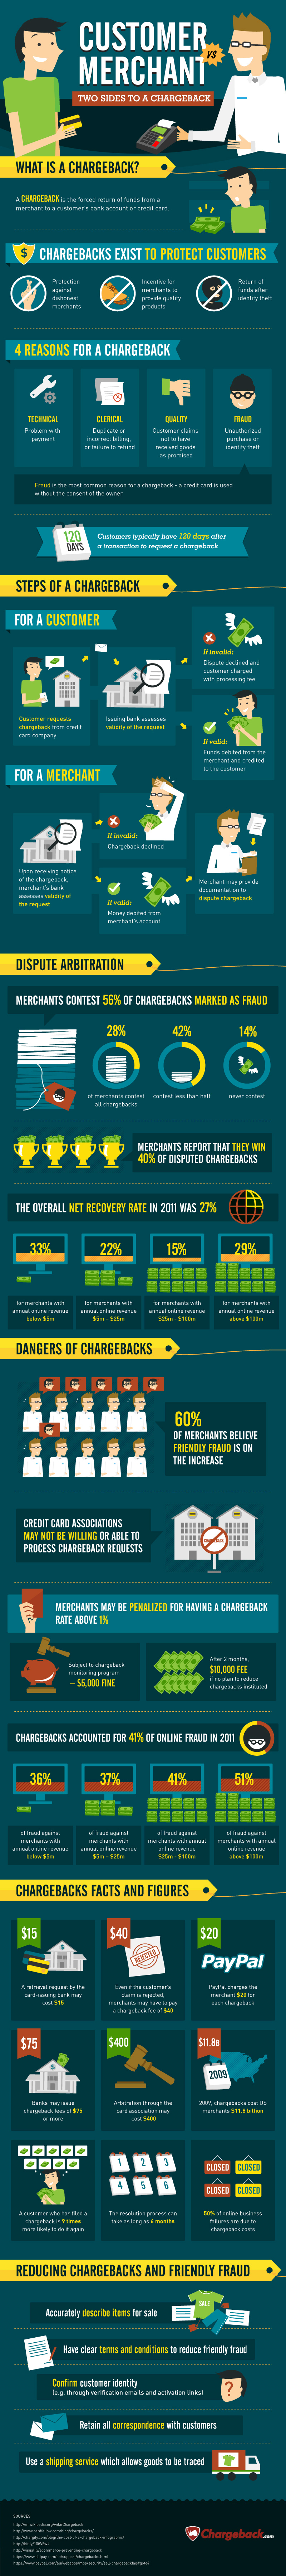 Merchant Vs. Customer: Two Sides to a Chargeback